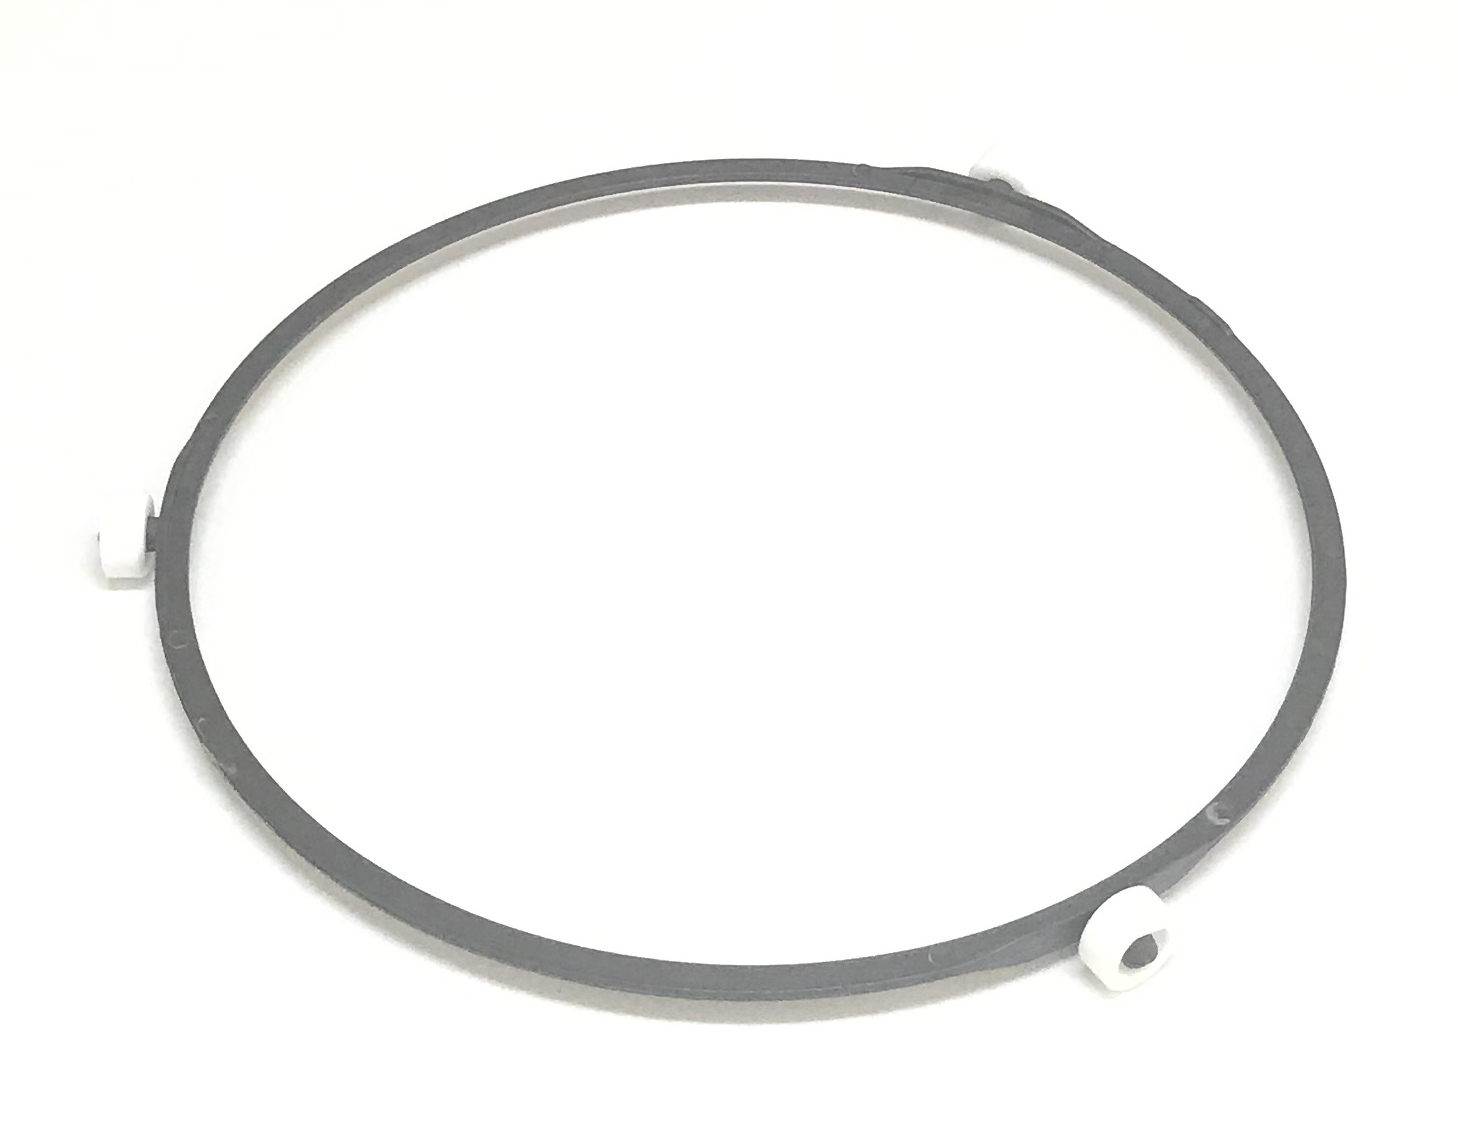 Samsung NEW OEM Samsung Microwave Plate Ring Shipped With ME18H704SFB/AA, ME18H704SFB/AC